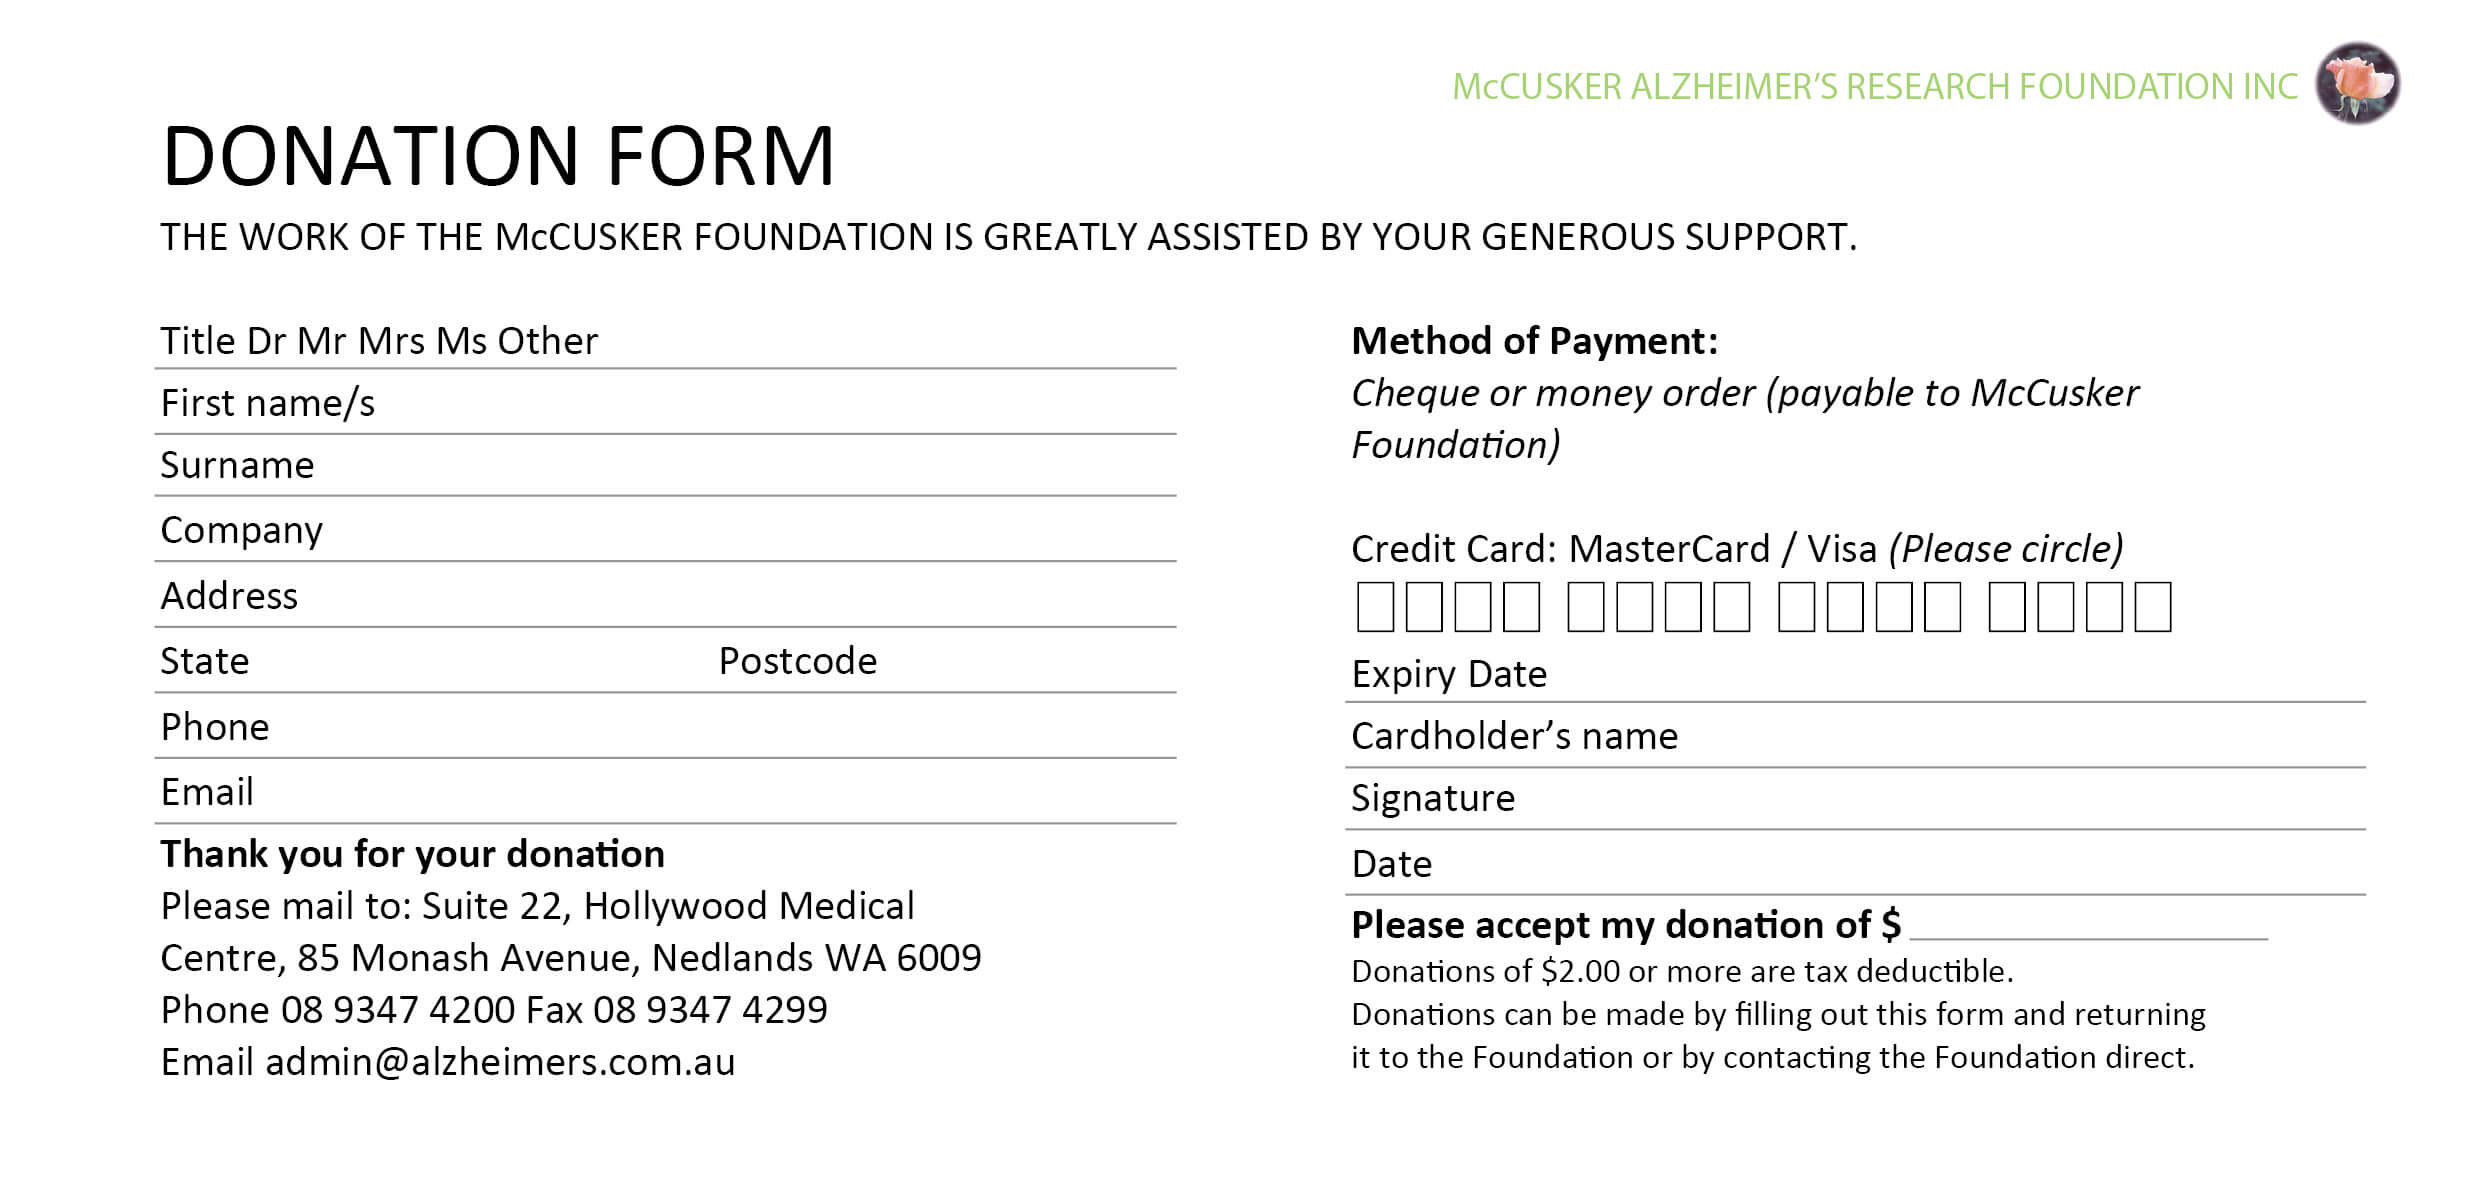 037 Fundraising Request Form Template Card Donation 458179 Inside Donation Card Template Free